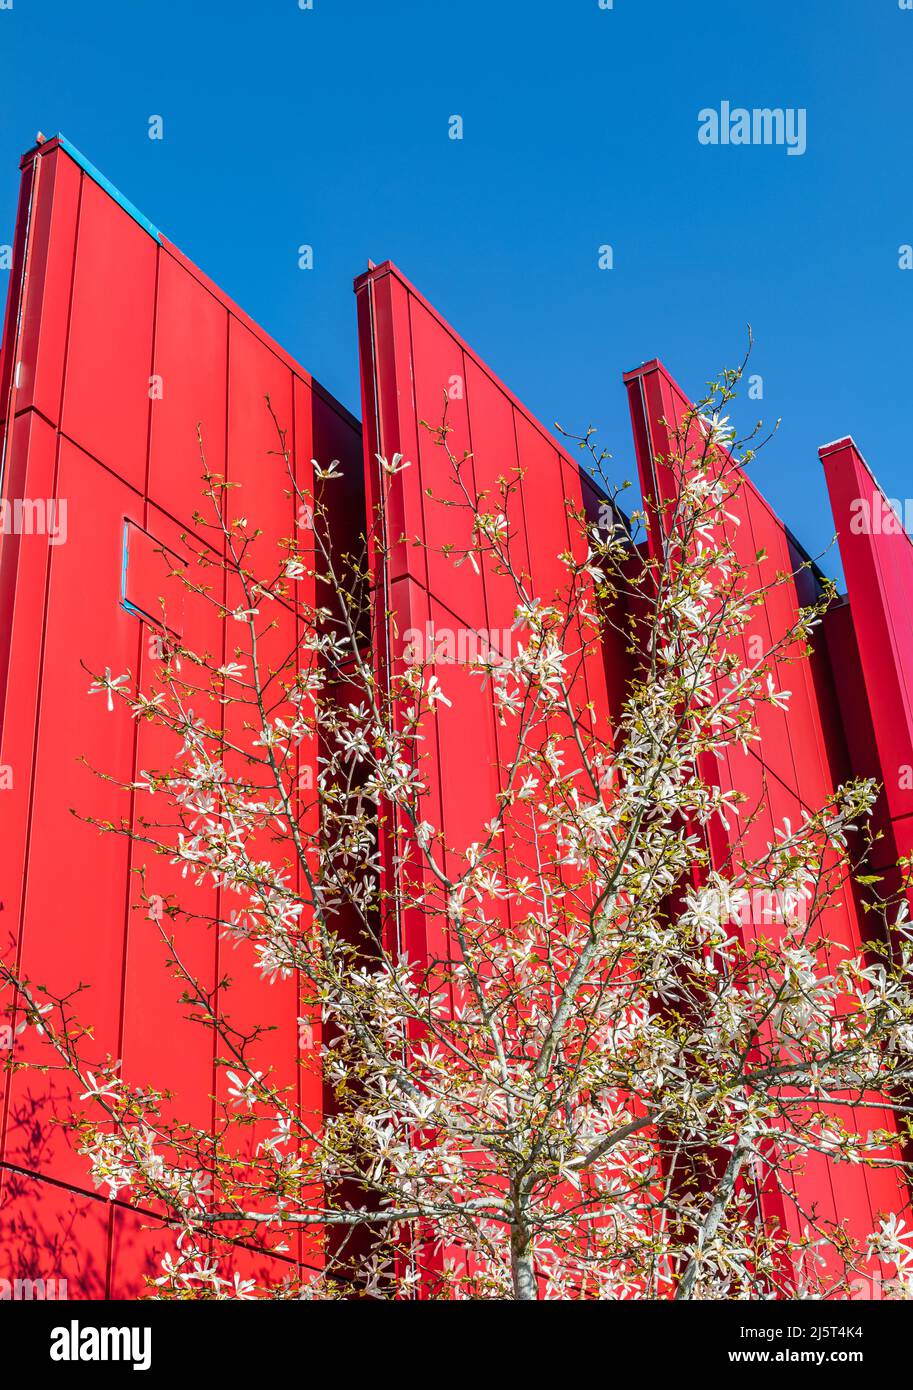 The wall of the building with triangular projections. Modern architecture in red color. Abstract geometric pattern building with spring tree. Street p Stock Photo